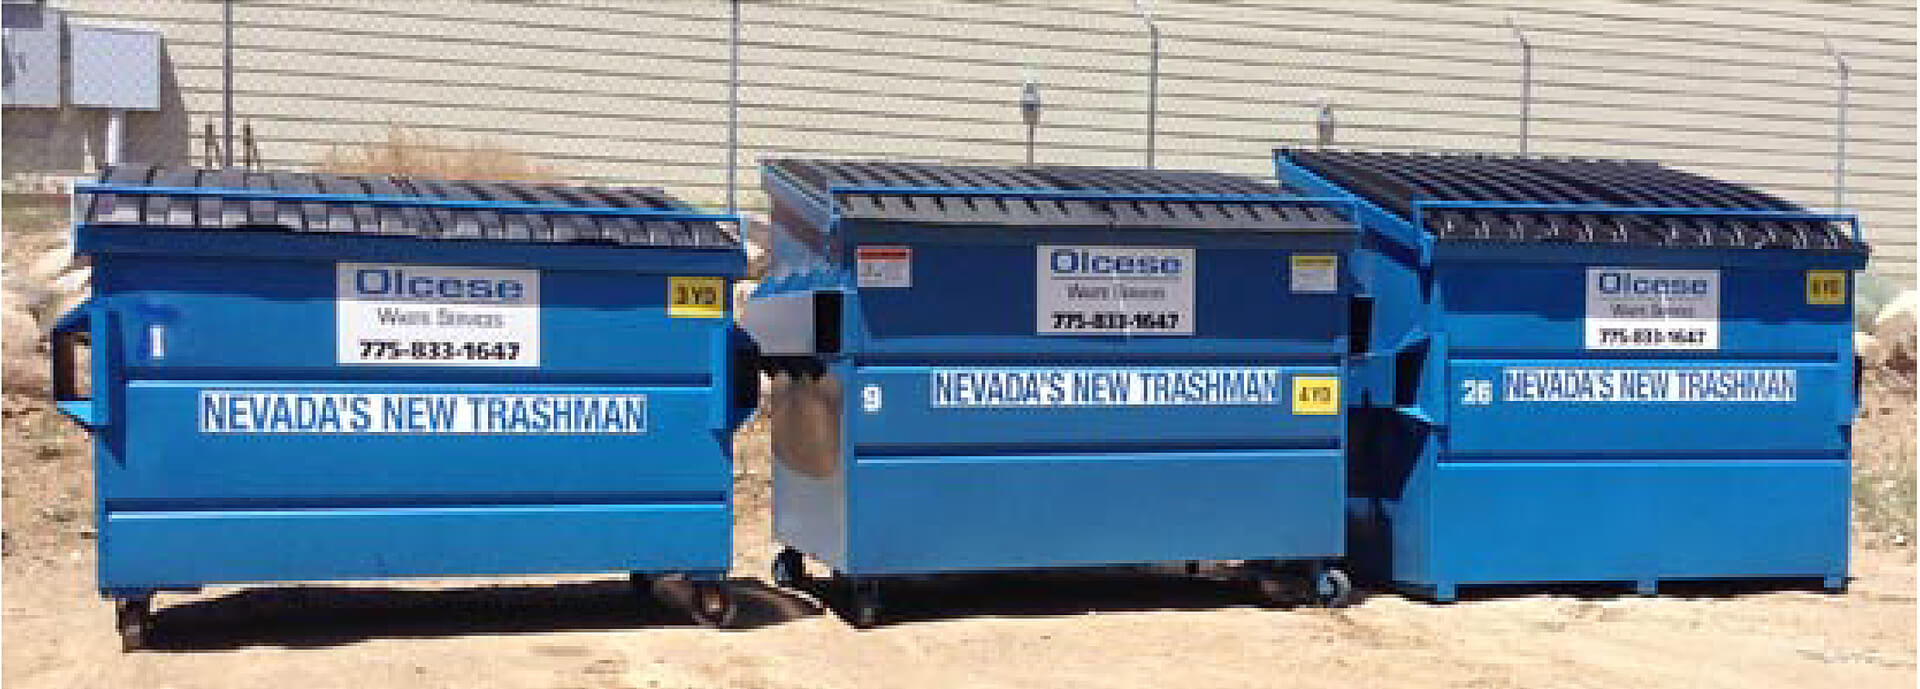 Temporary Rolloff Dumpsters - Olcese Waste Services